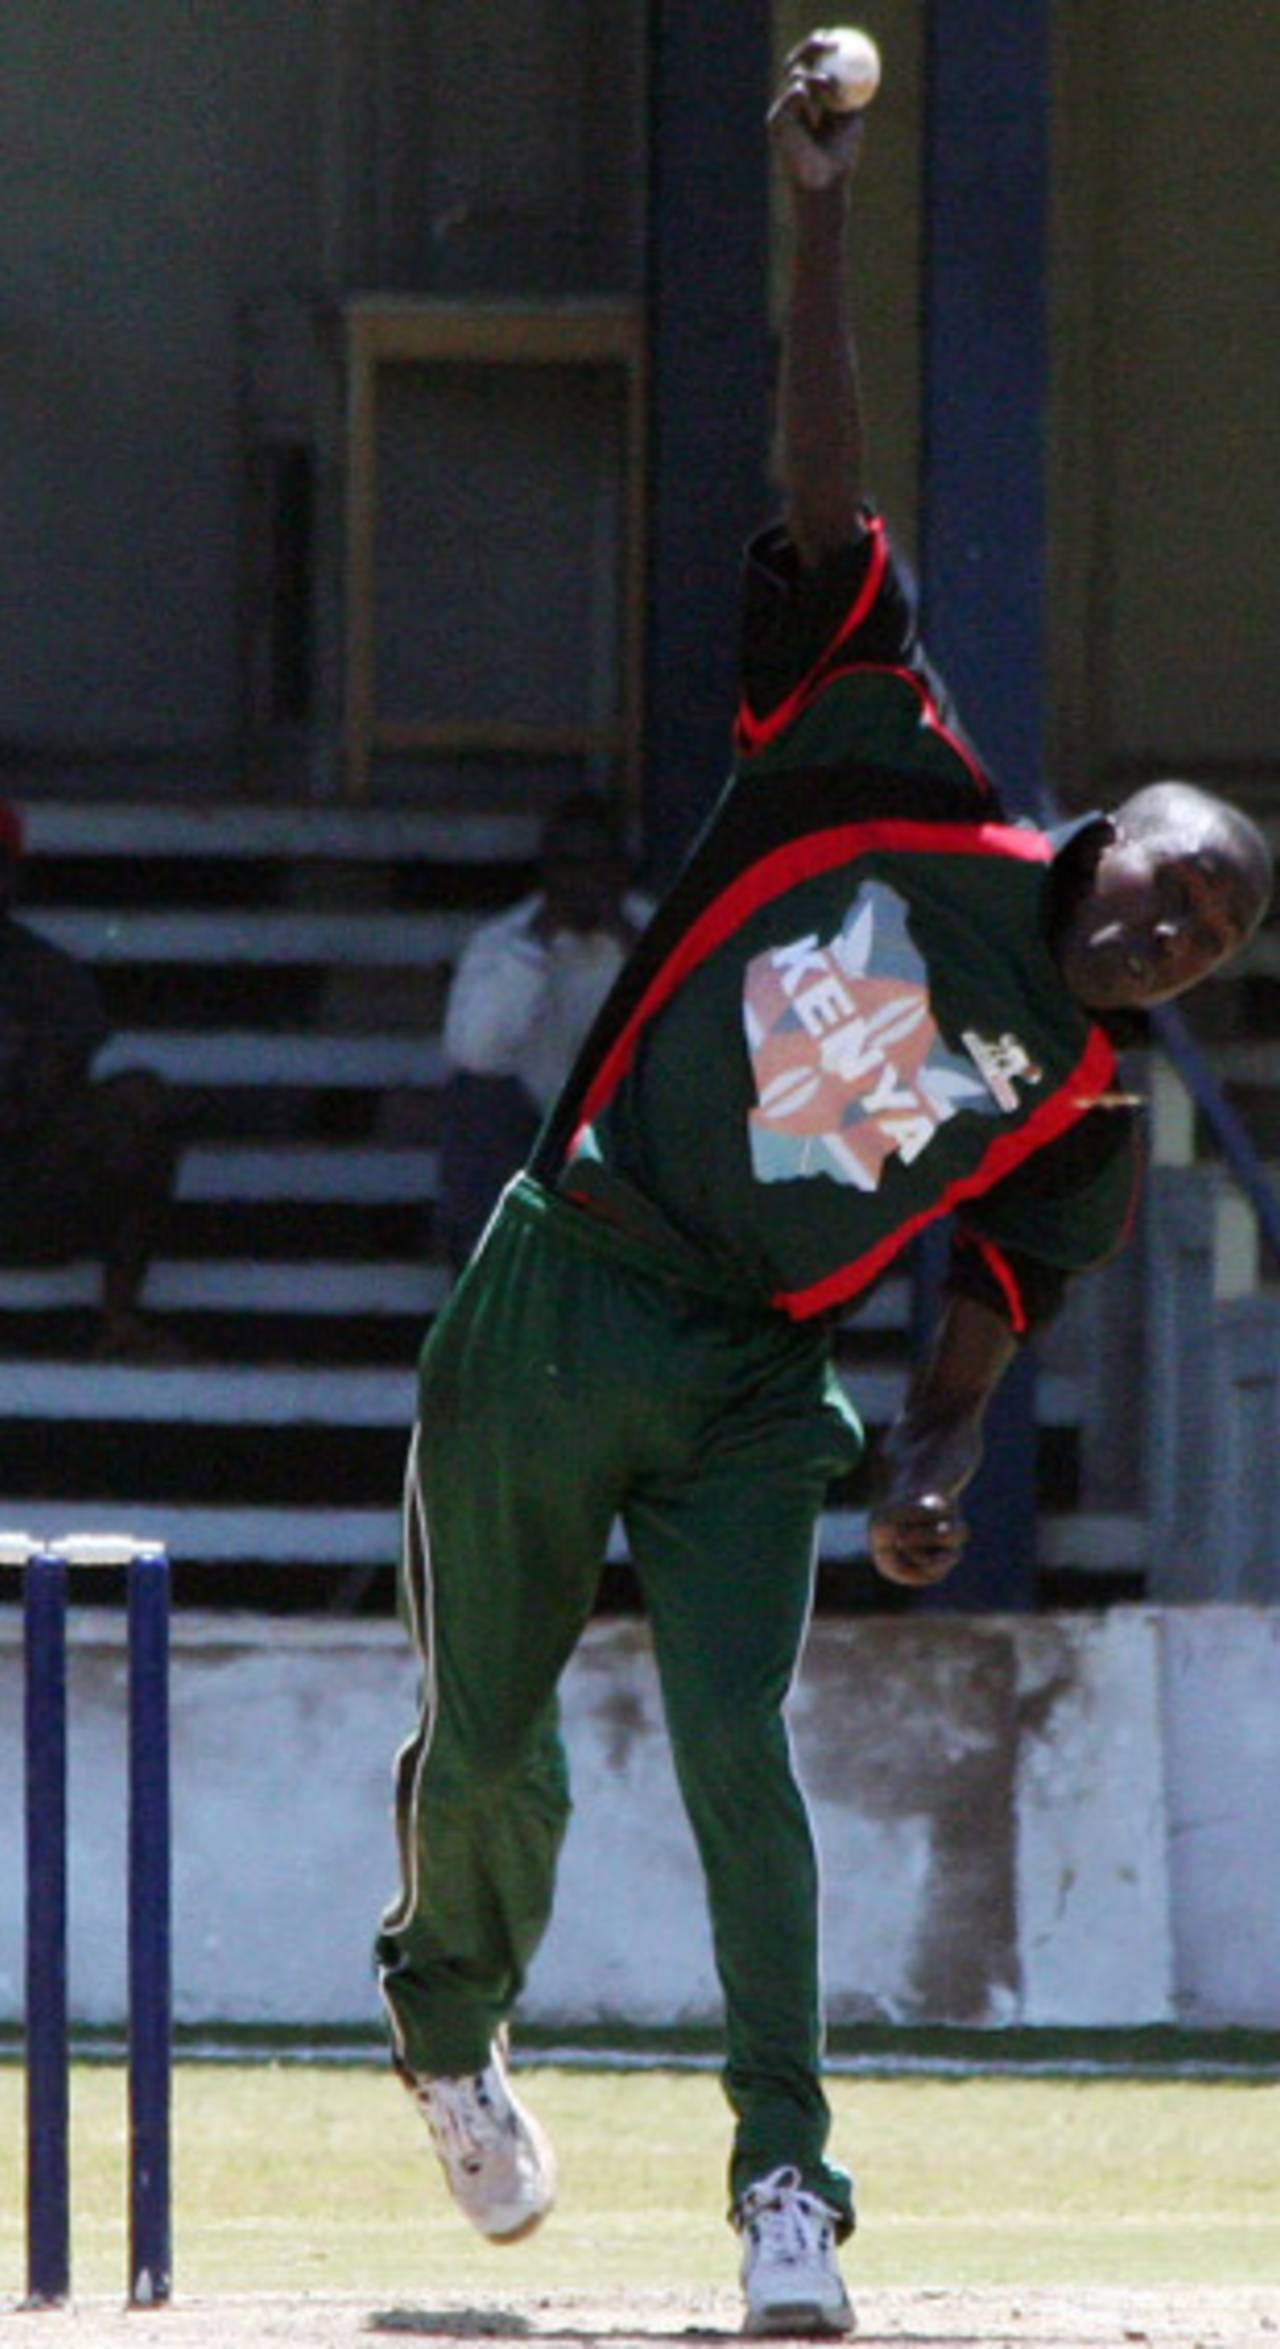 Jimmy Kamande will need to bring the best out of Kenya if they are to challenge a strong Afghanistan side&nbsp;&nbsp;&bull;&nbsp;&nbsp;Thota Sreenivas